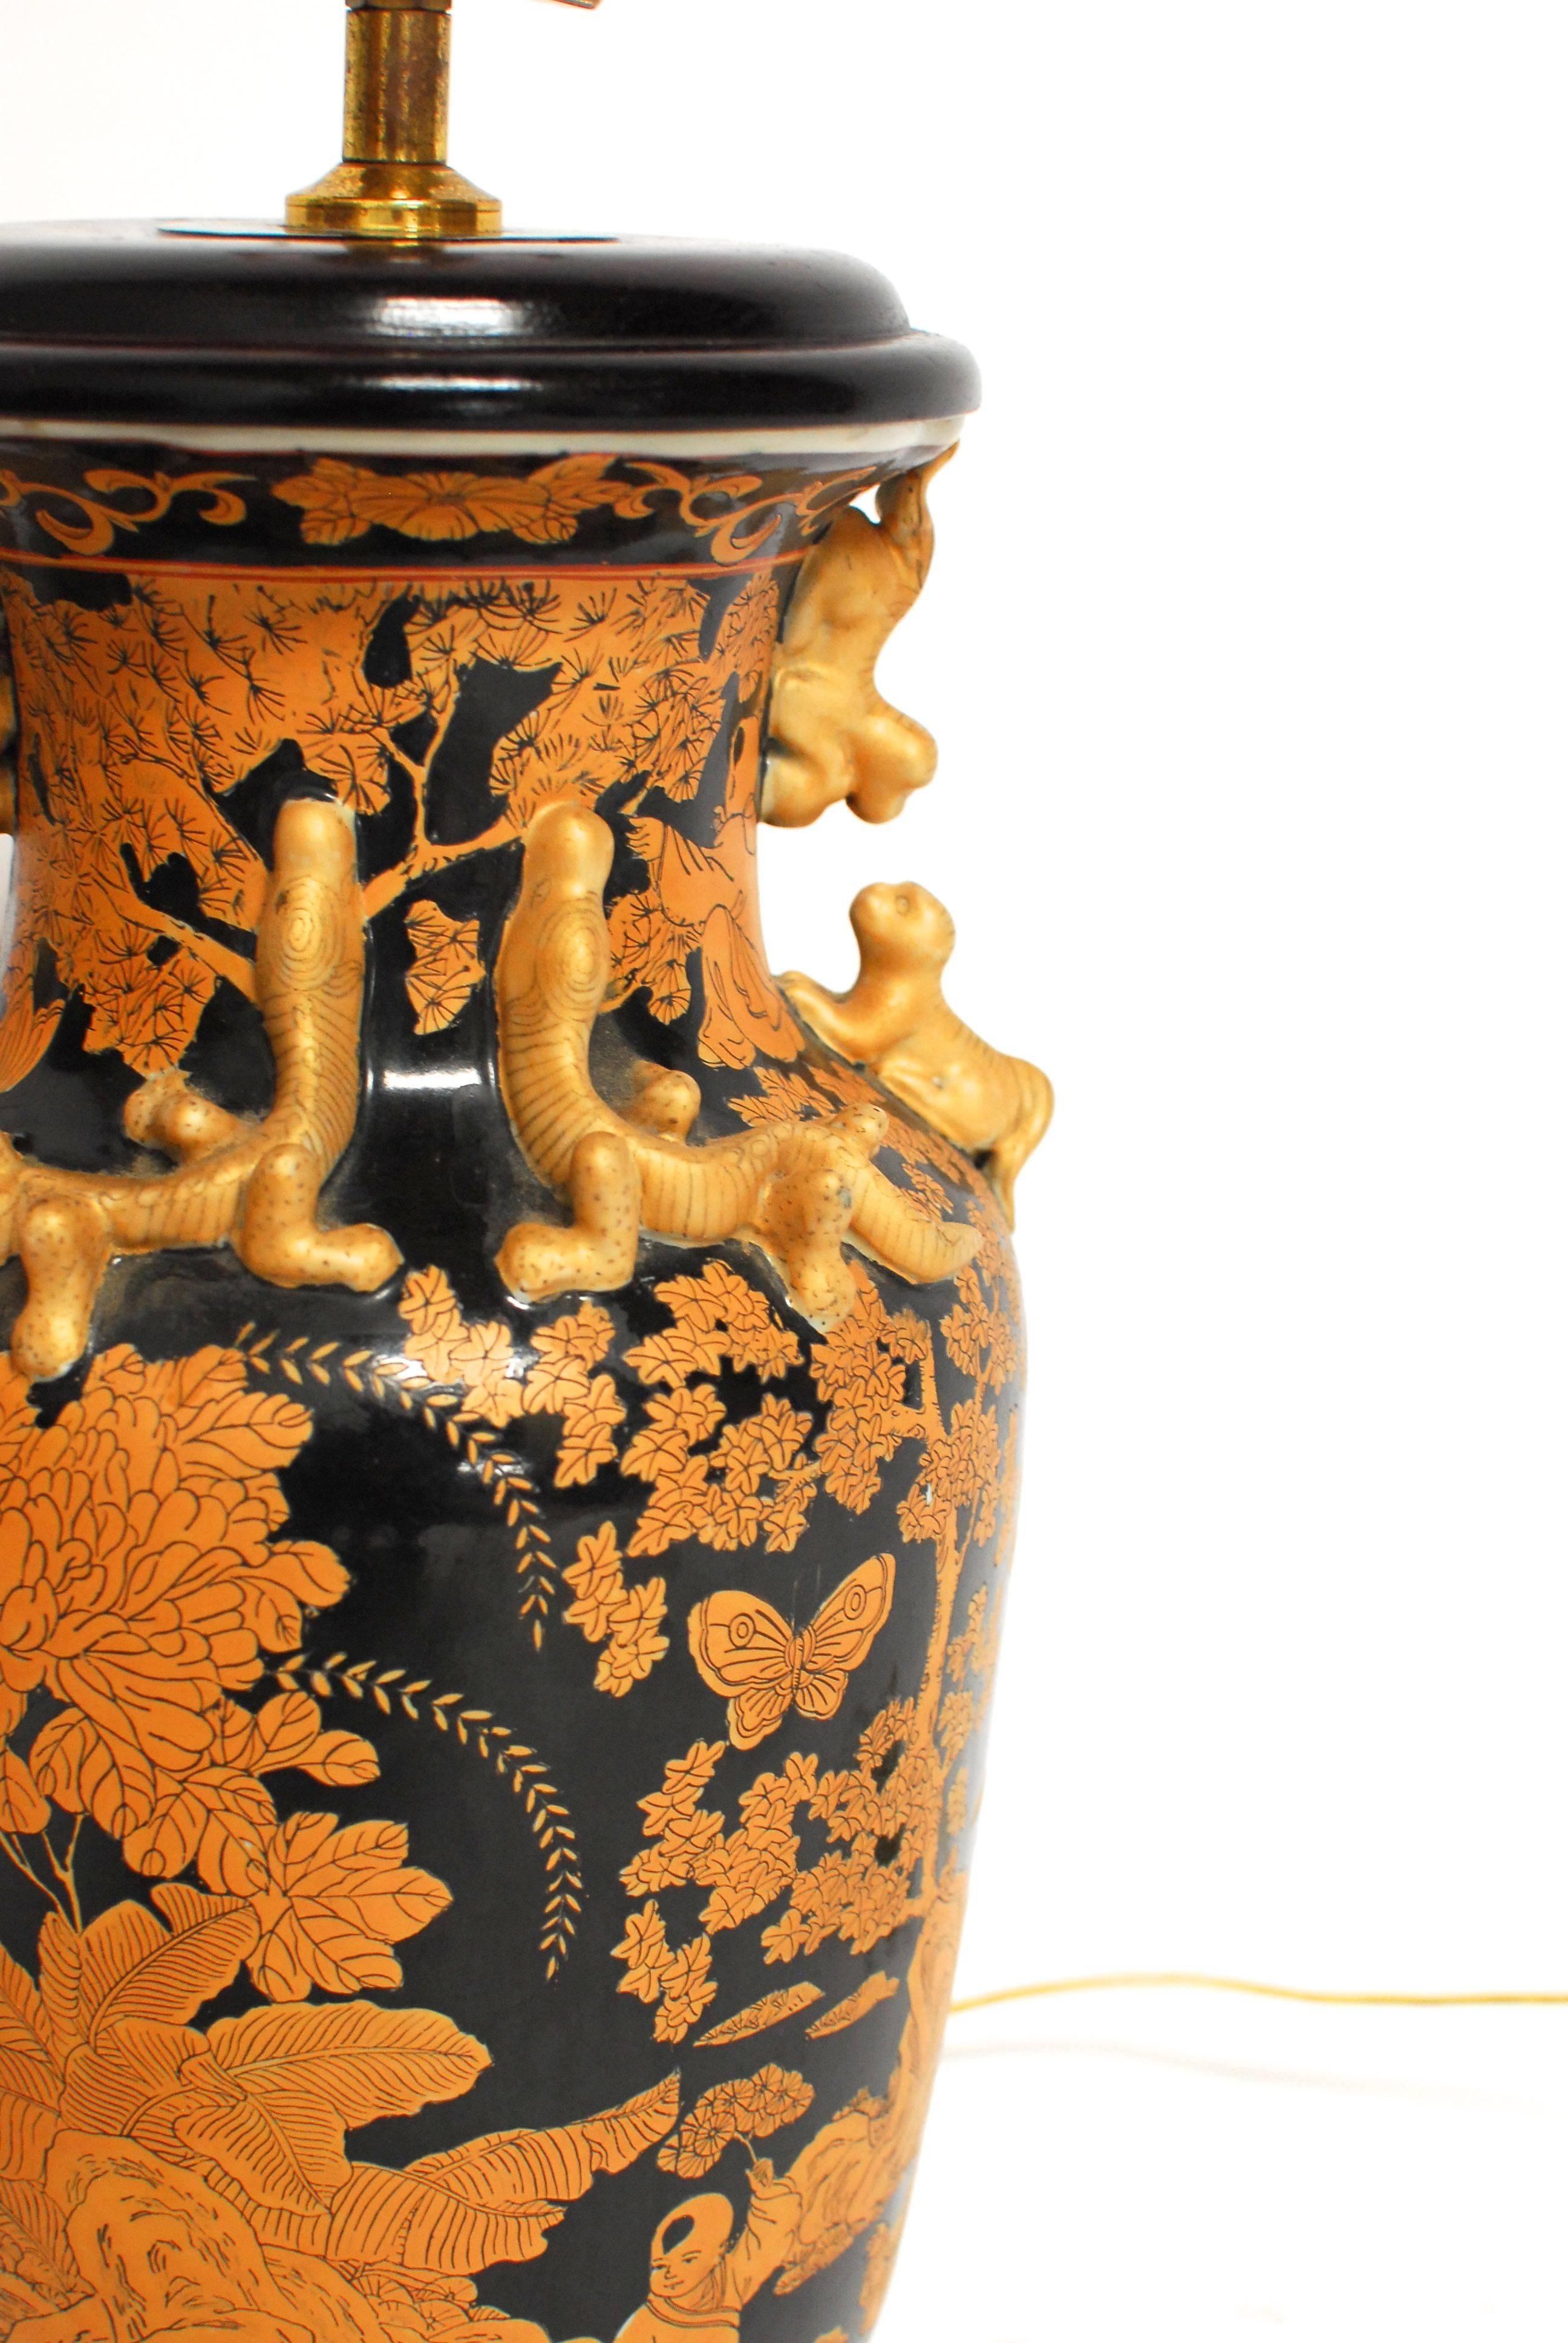 Pair of antique Chinese famille noir vases made of enameled porcelain with applied gilt lizards and figural foo dog handles. Each vase having hand-painted designs depicting young scholars at play amongst temples and trees. Intricate under glazed